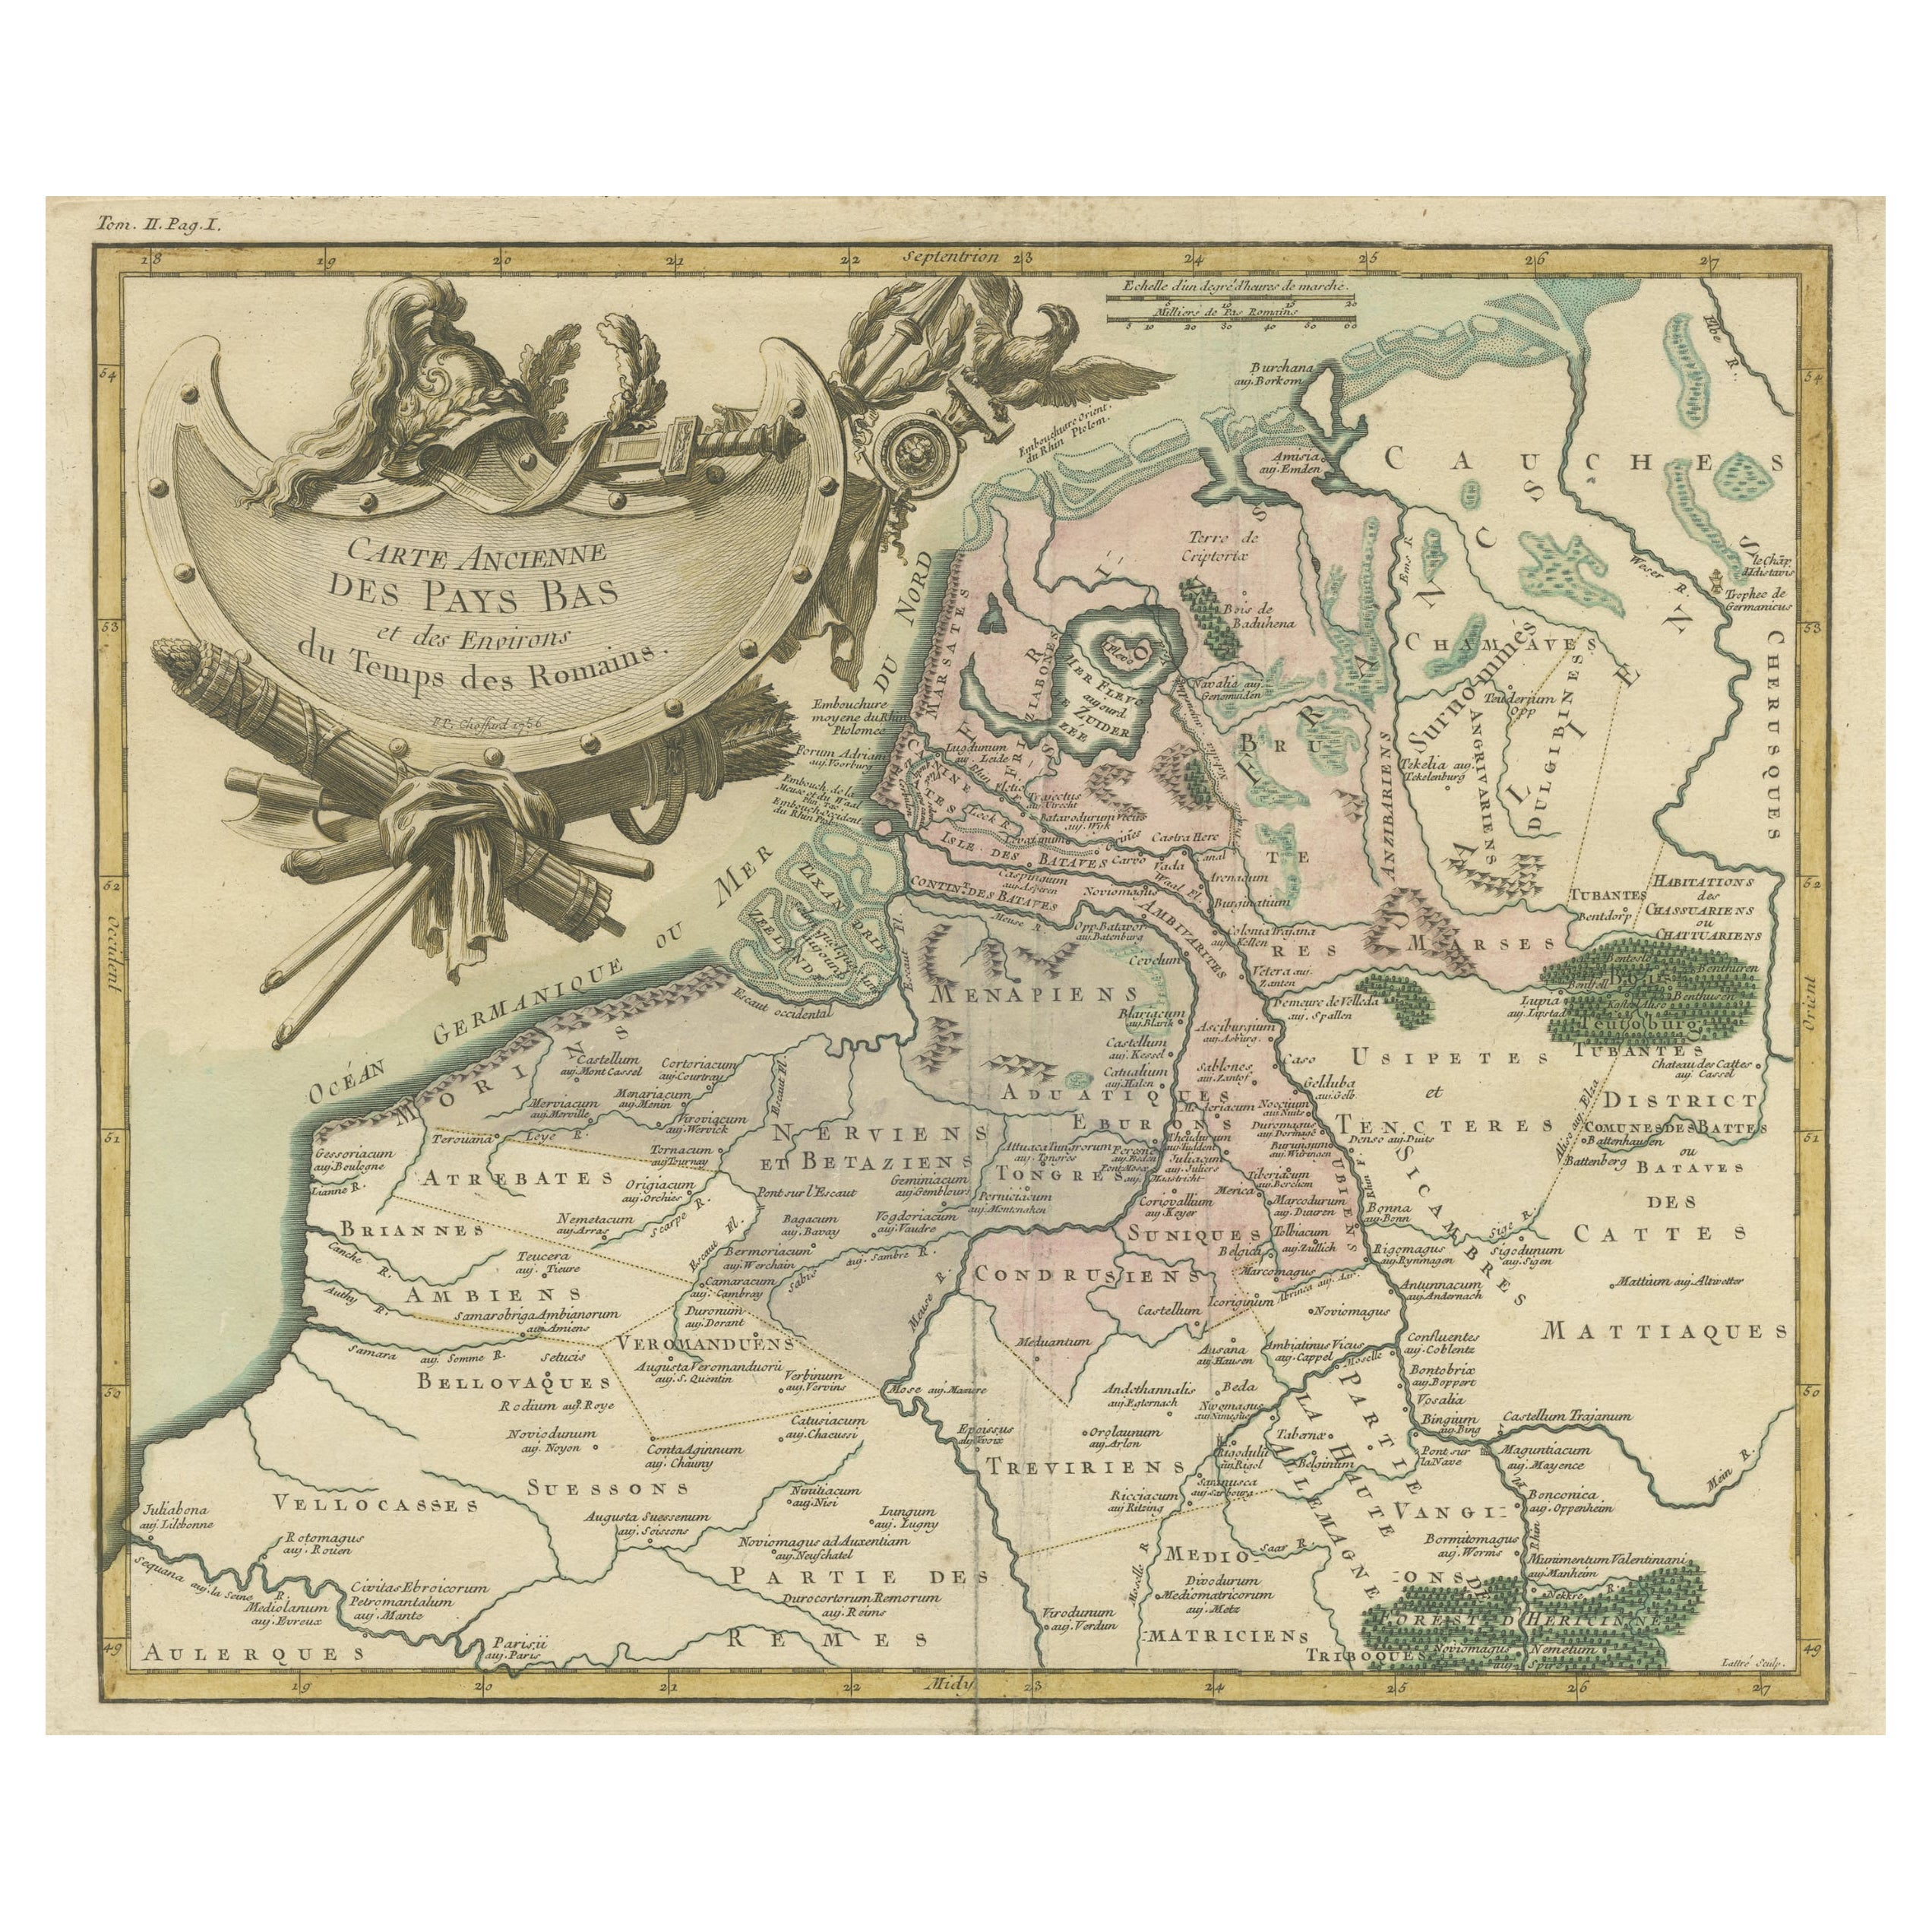 Antique Map of the Netherlands in the time of the Domination by the Roman Empire